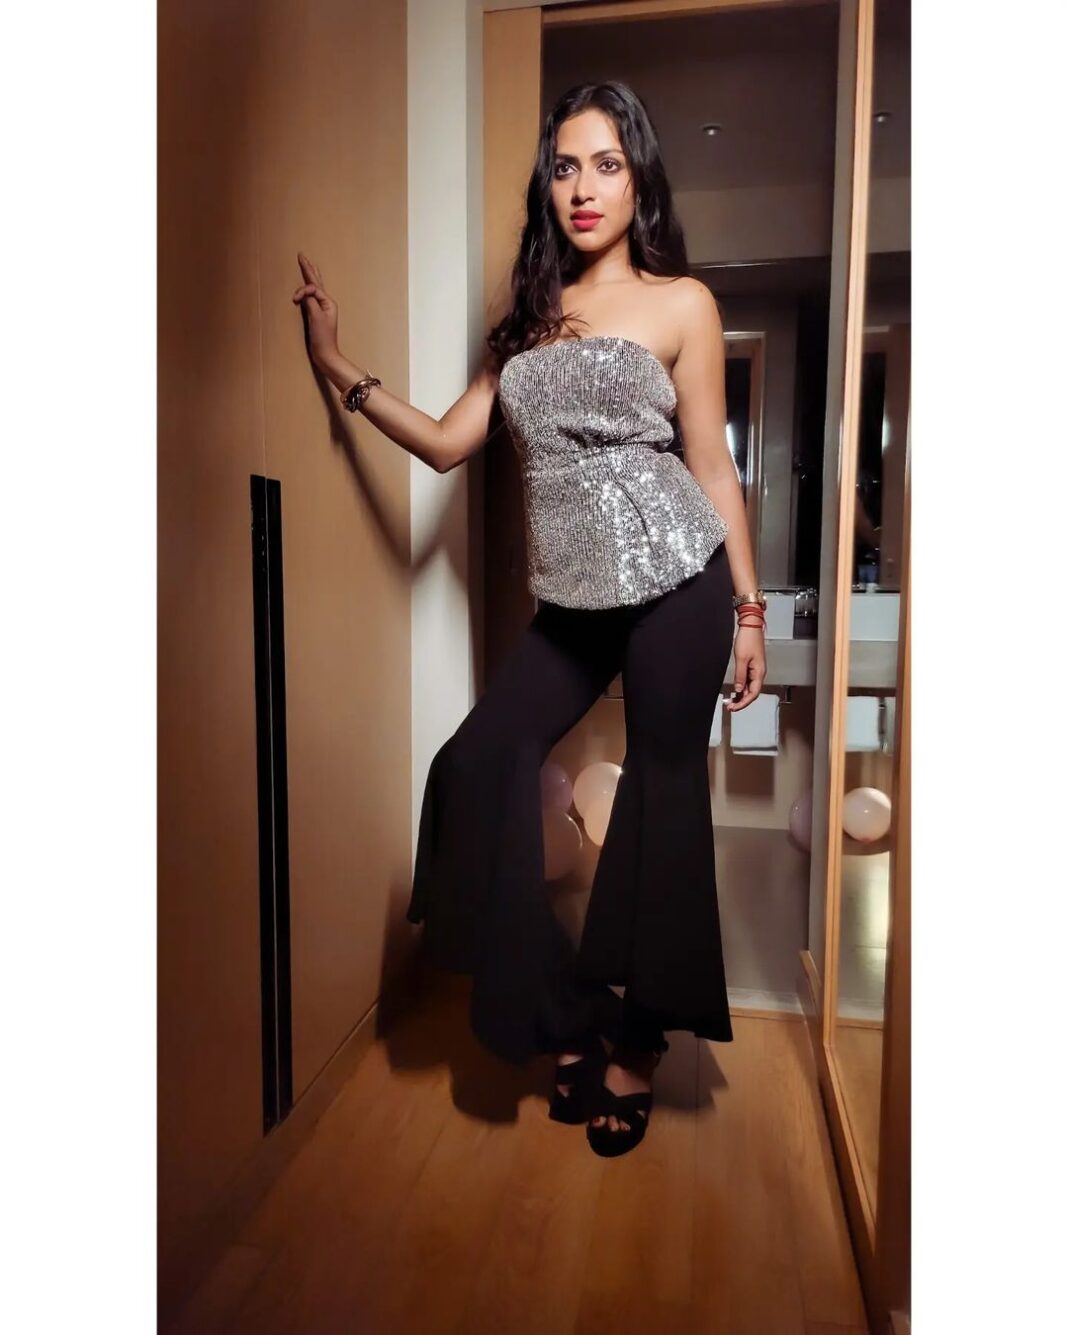 Amala Paul Instagram - That time when I got all decked up to celebrate my bffff @rachel_maaney's bridal shower. 👼💖🍸 It really is a throwback in the truest sense as her little baby Reign is already almost a month old. #IAmALazySuzy 🤭 A super fun Reel coming up next. 🫶 #celebration #bridalshower #bff #girlschilling #ootd #glamup #dressingup #fashion